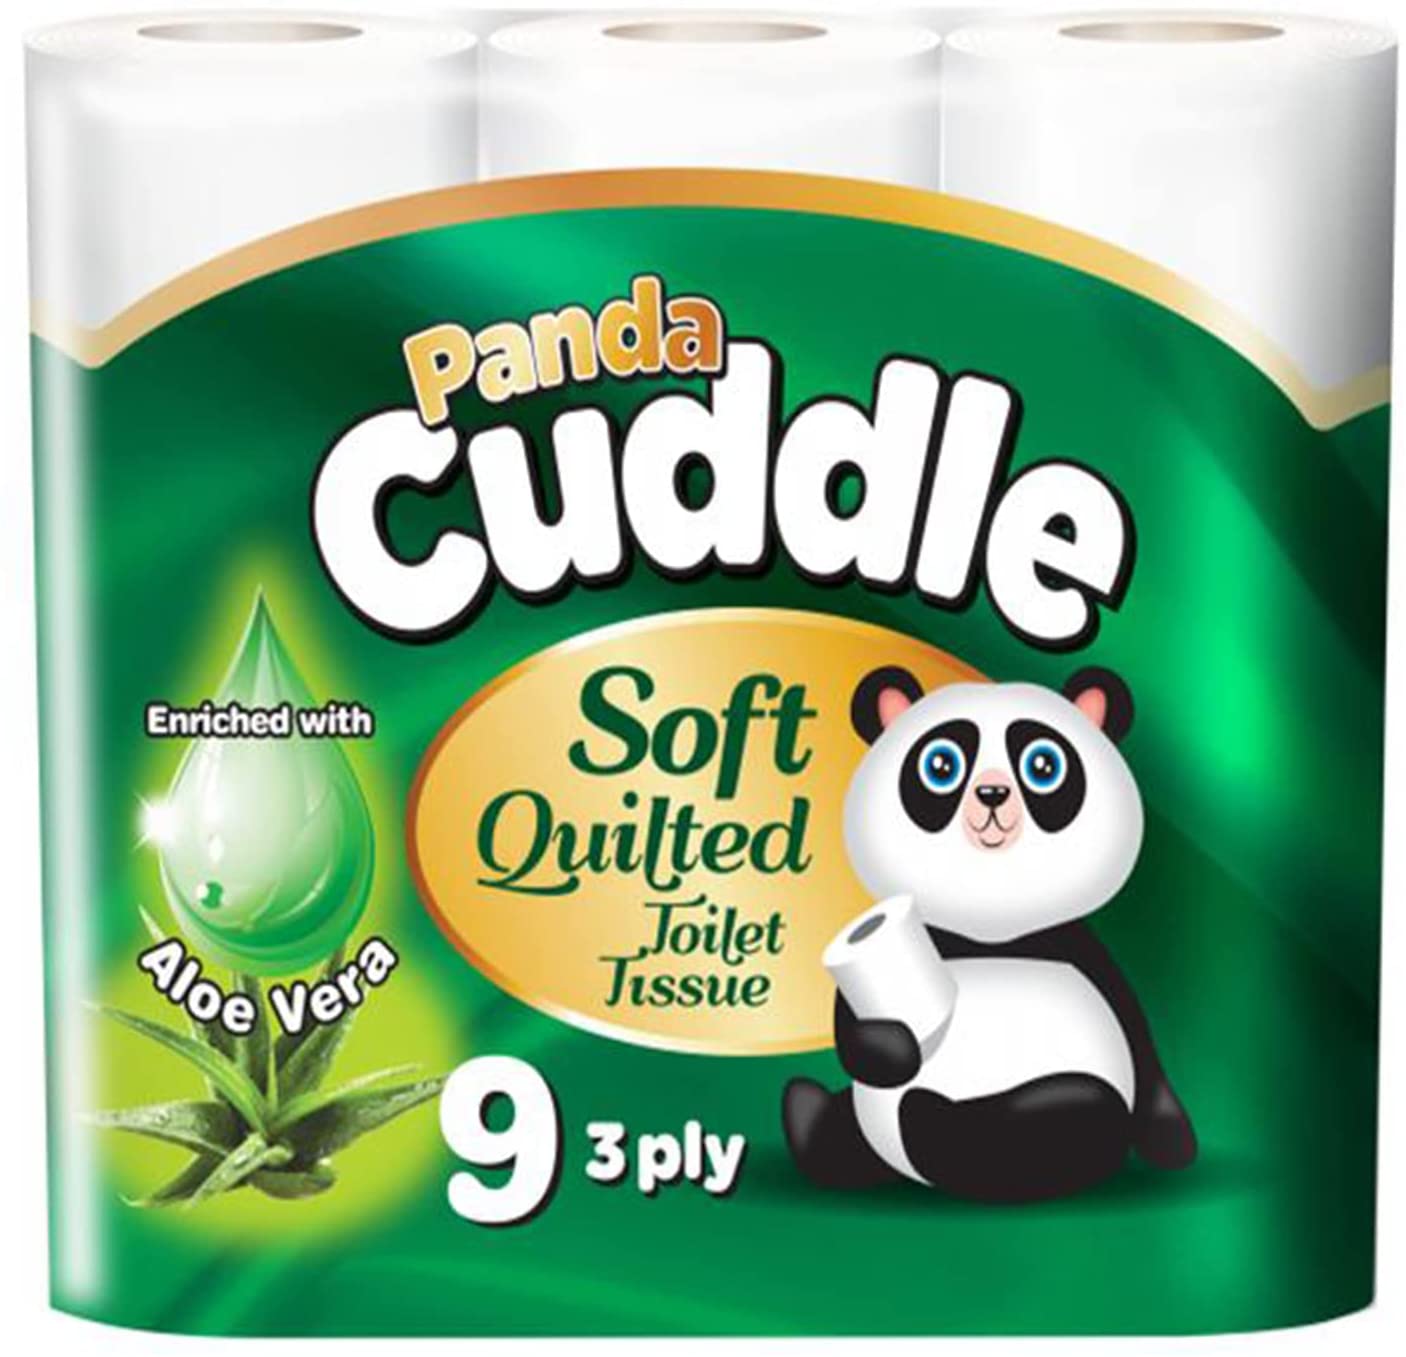 45 Rolls Panda Cuddle Aloe Vera Soft Quilted 3 Ply 160 Sheets Toilet Tissue Rolls